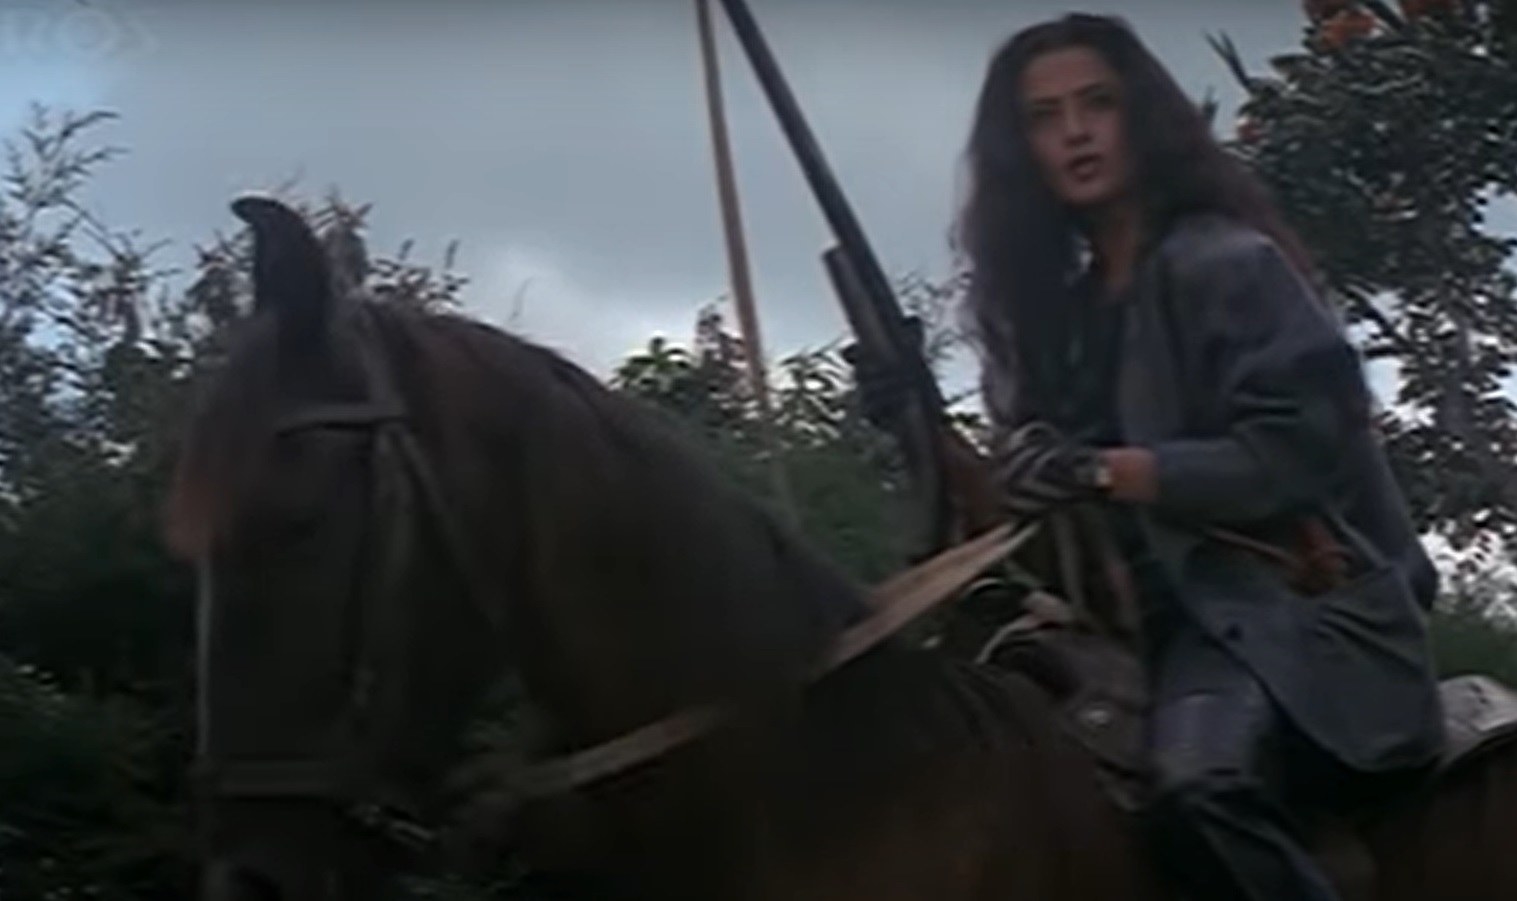 Nandini sits atop a horse and brandishes a rifle